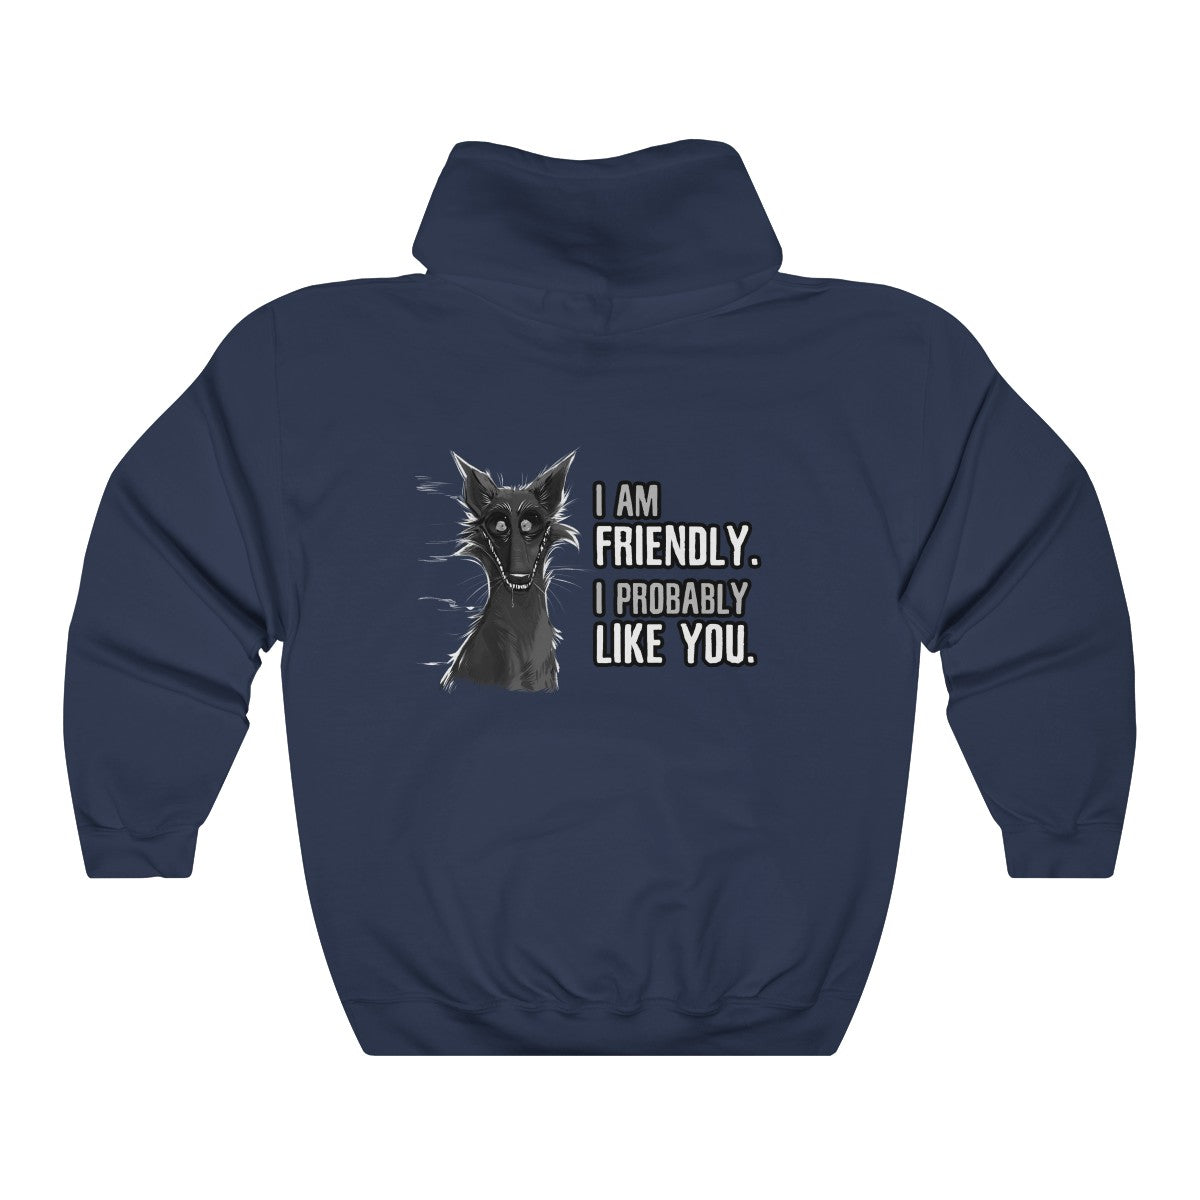 I probably DON'T hate you - Hoodie Hoodie Cyamallo Navy Blue S 